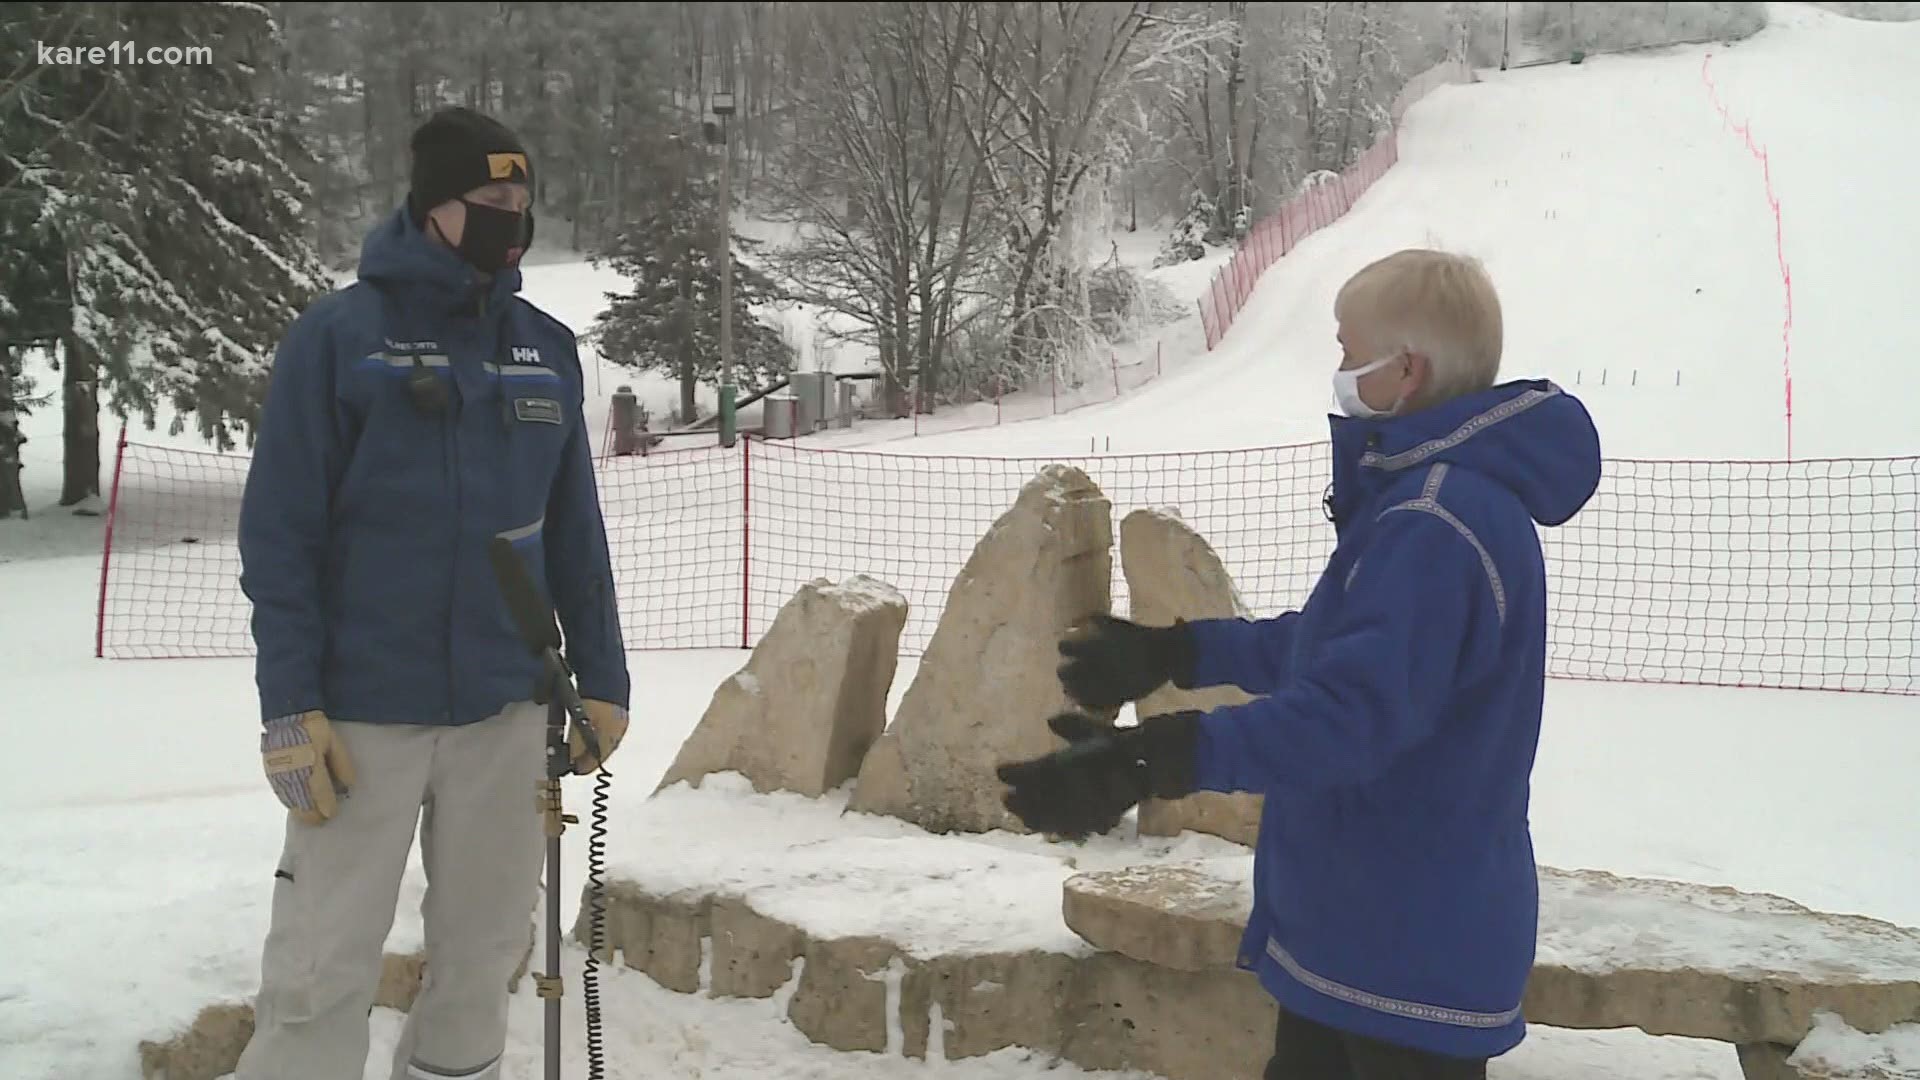 Enjoy what Minnesota's winter has to offer at Afton Alps.